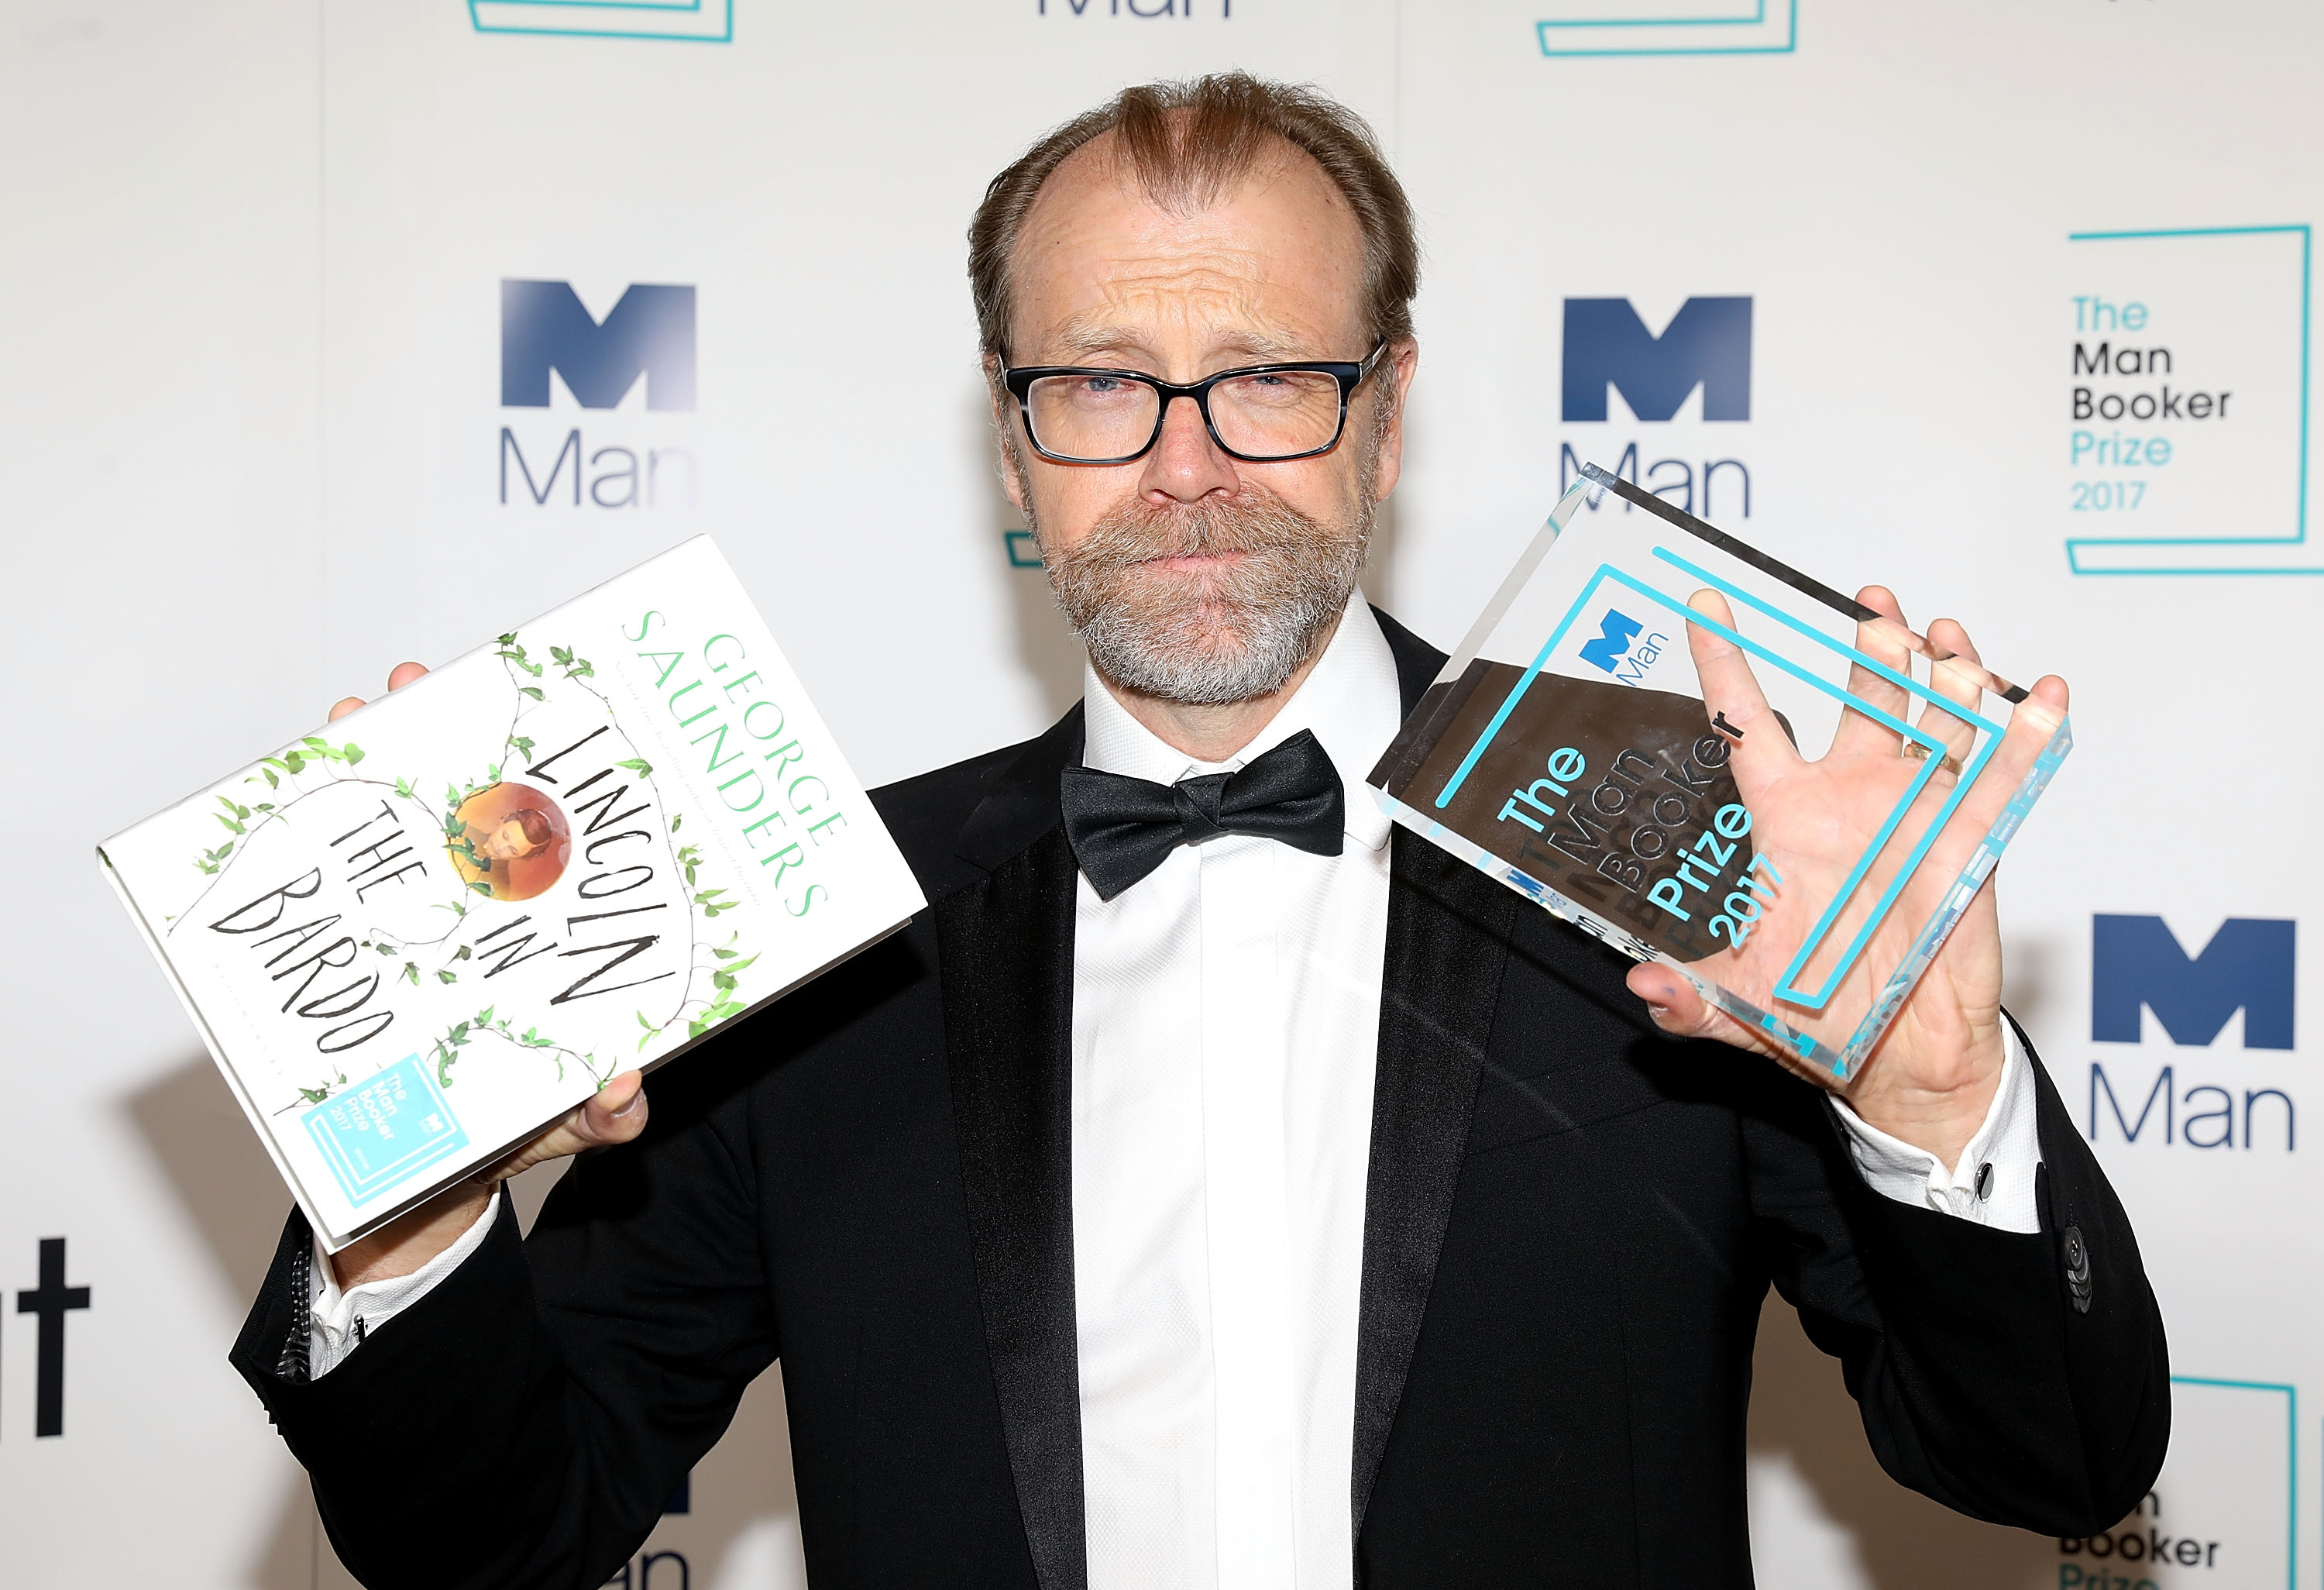 Winning author George Saunders during the Man Booker Prize winner announcement photocall at The Guildhall on October 17, 2017 in London, England. (Tim P. Whitby&mdash;Tim P. Whitby/Getty Images)